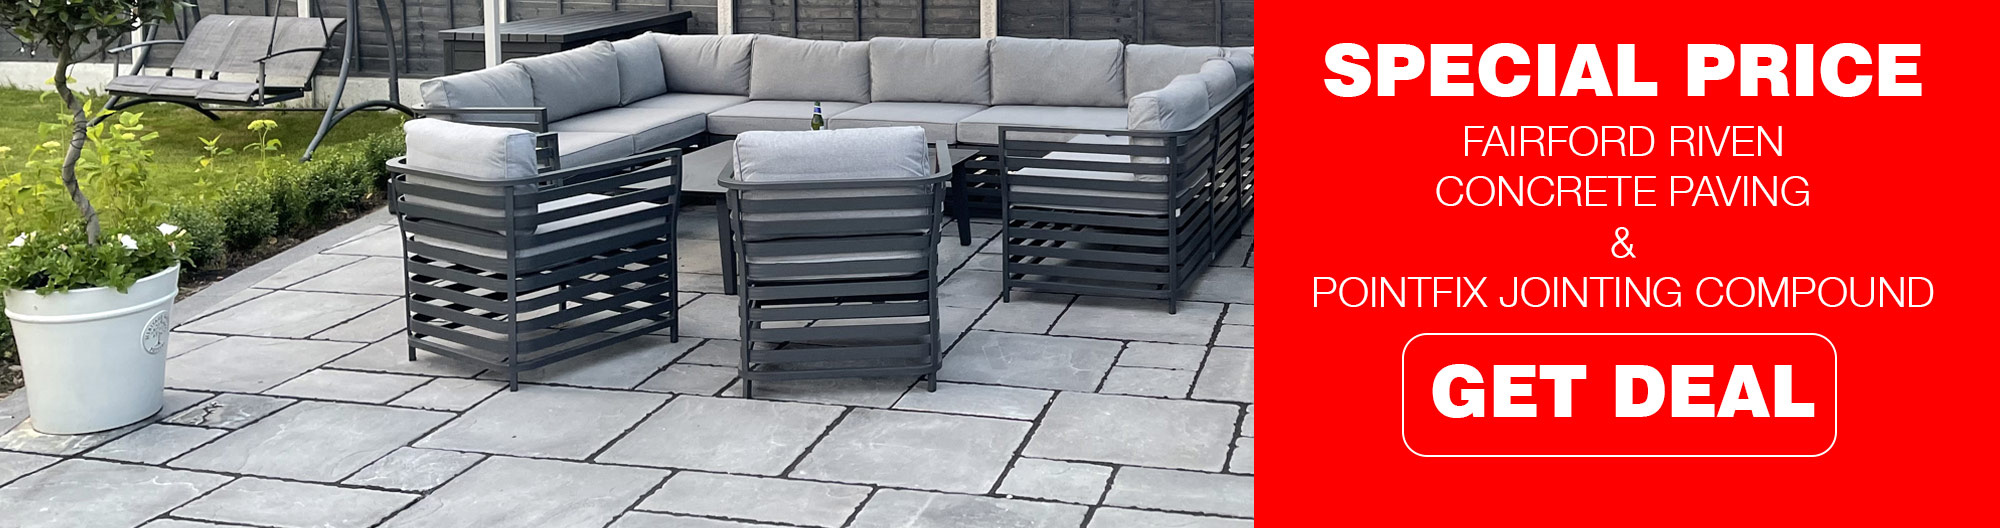 Premium Range Concrete Paving - Special Offer - From £32.99m² - Save Now!